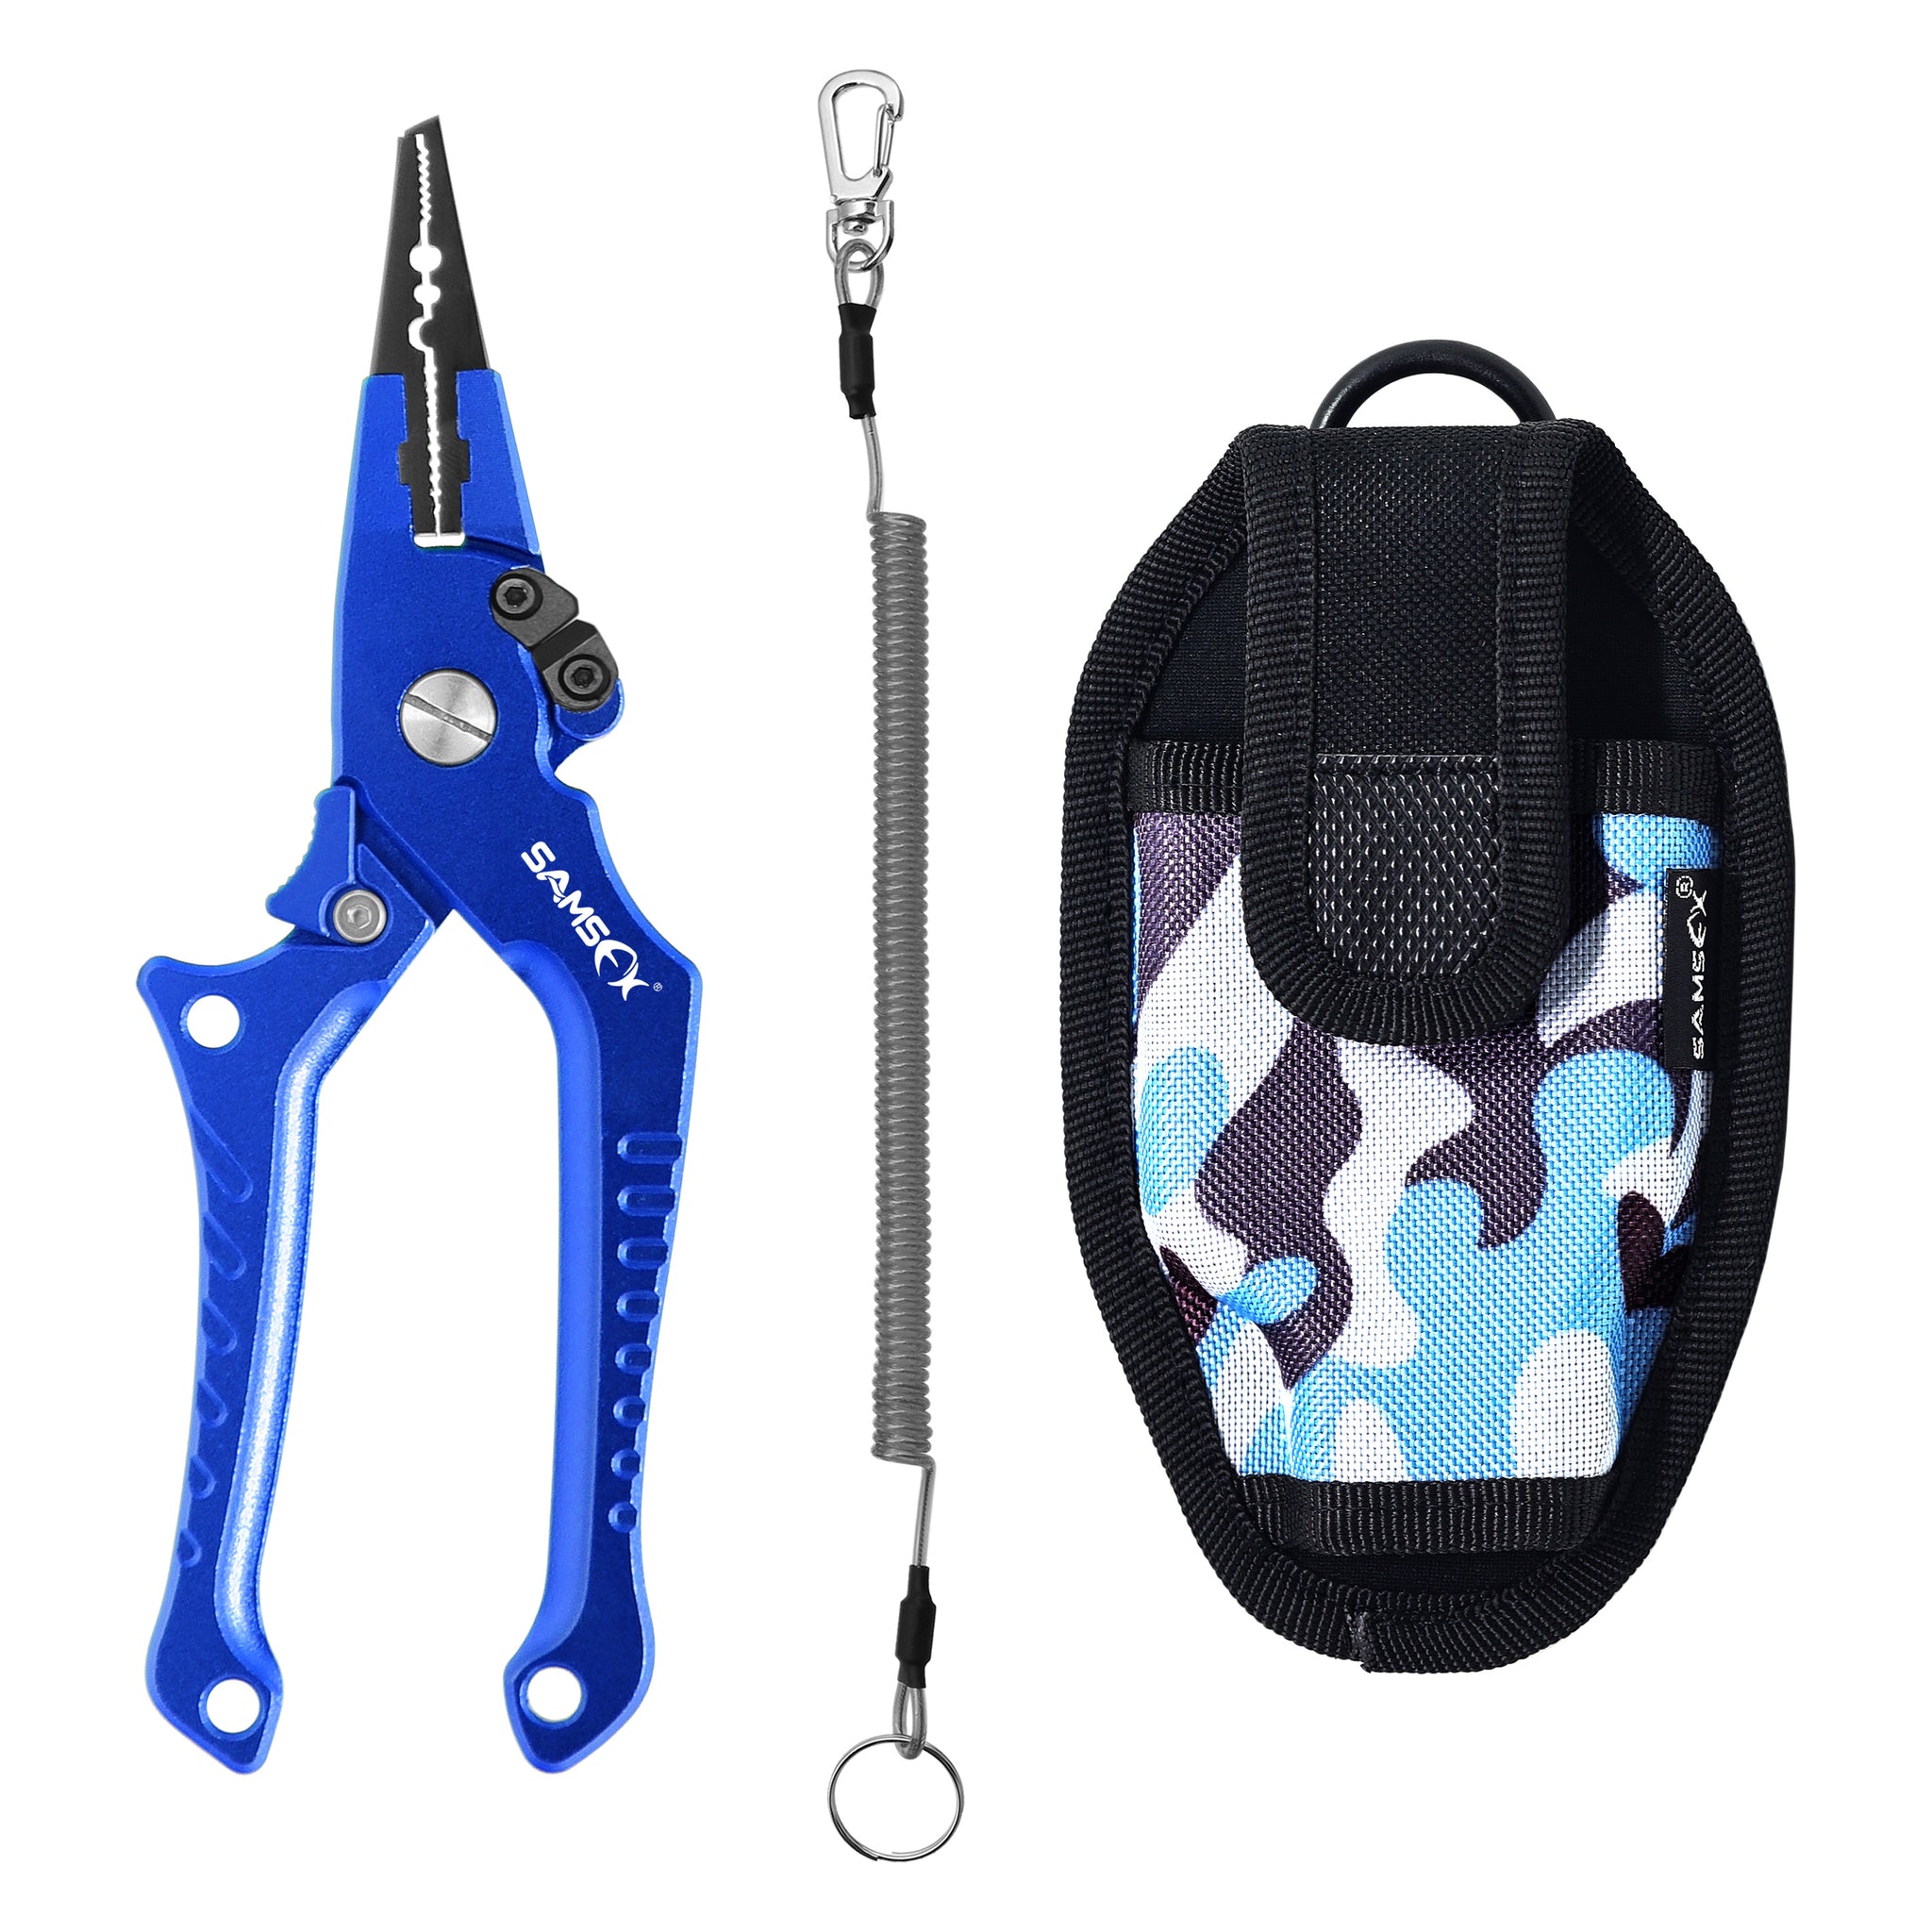 Fishing Pliers Tools With Sheath, Aluminum Alloy Saltwater Fishing